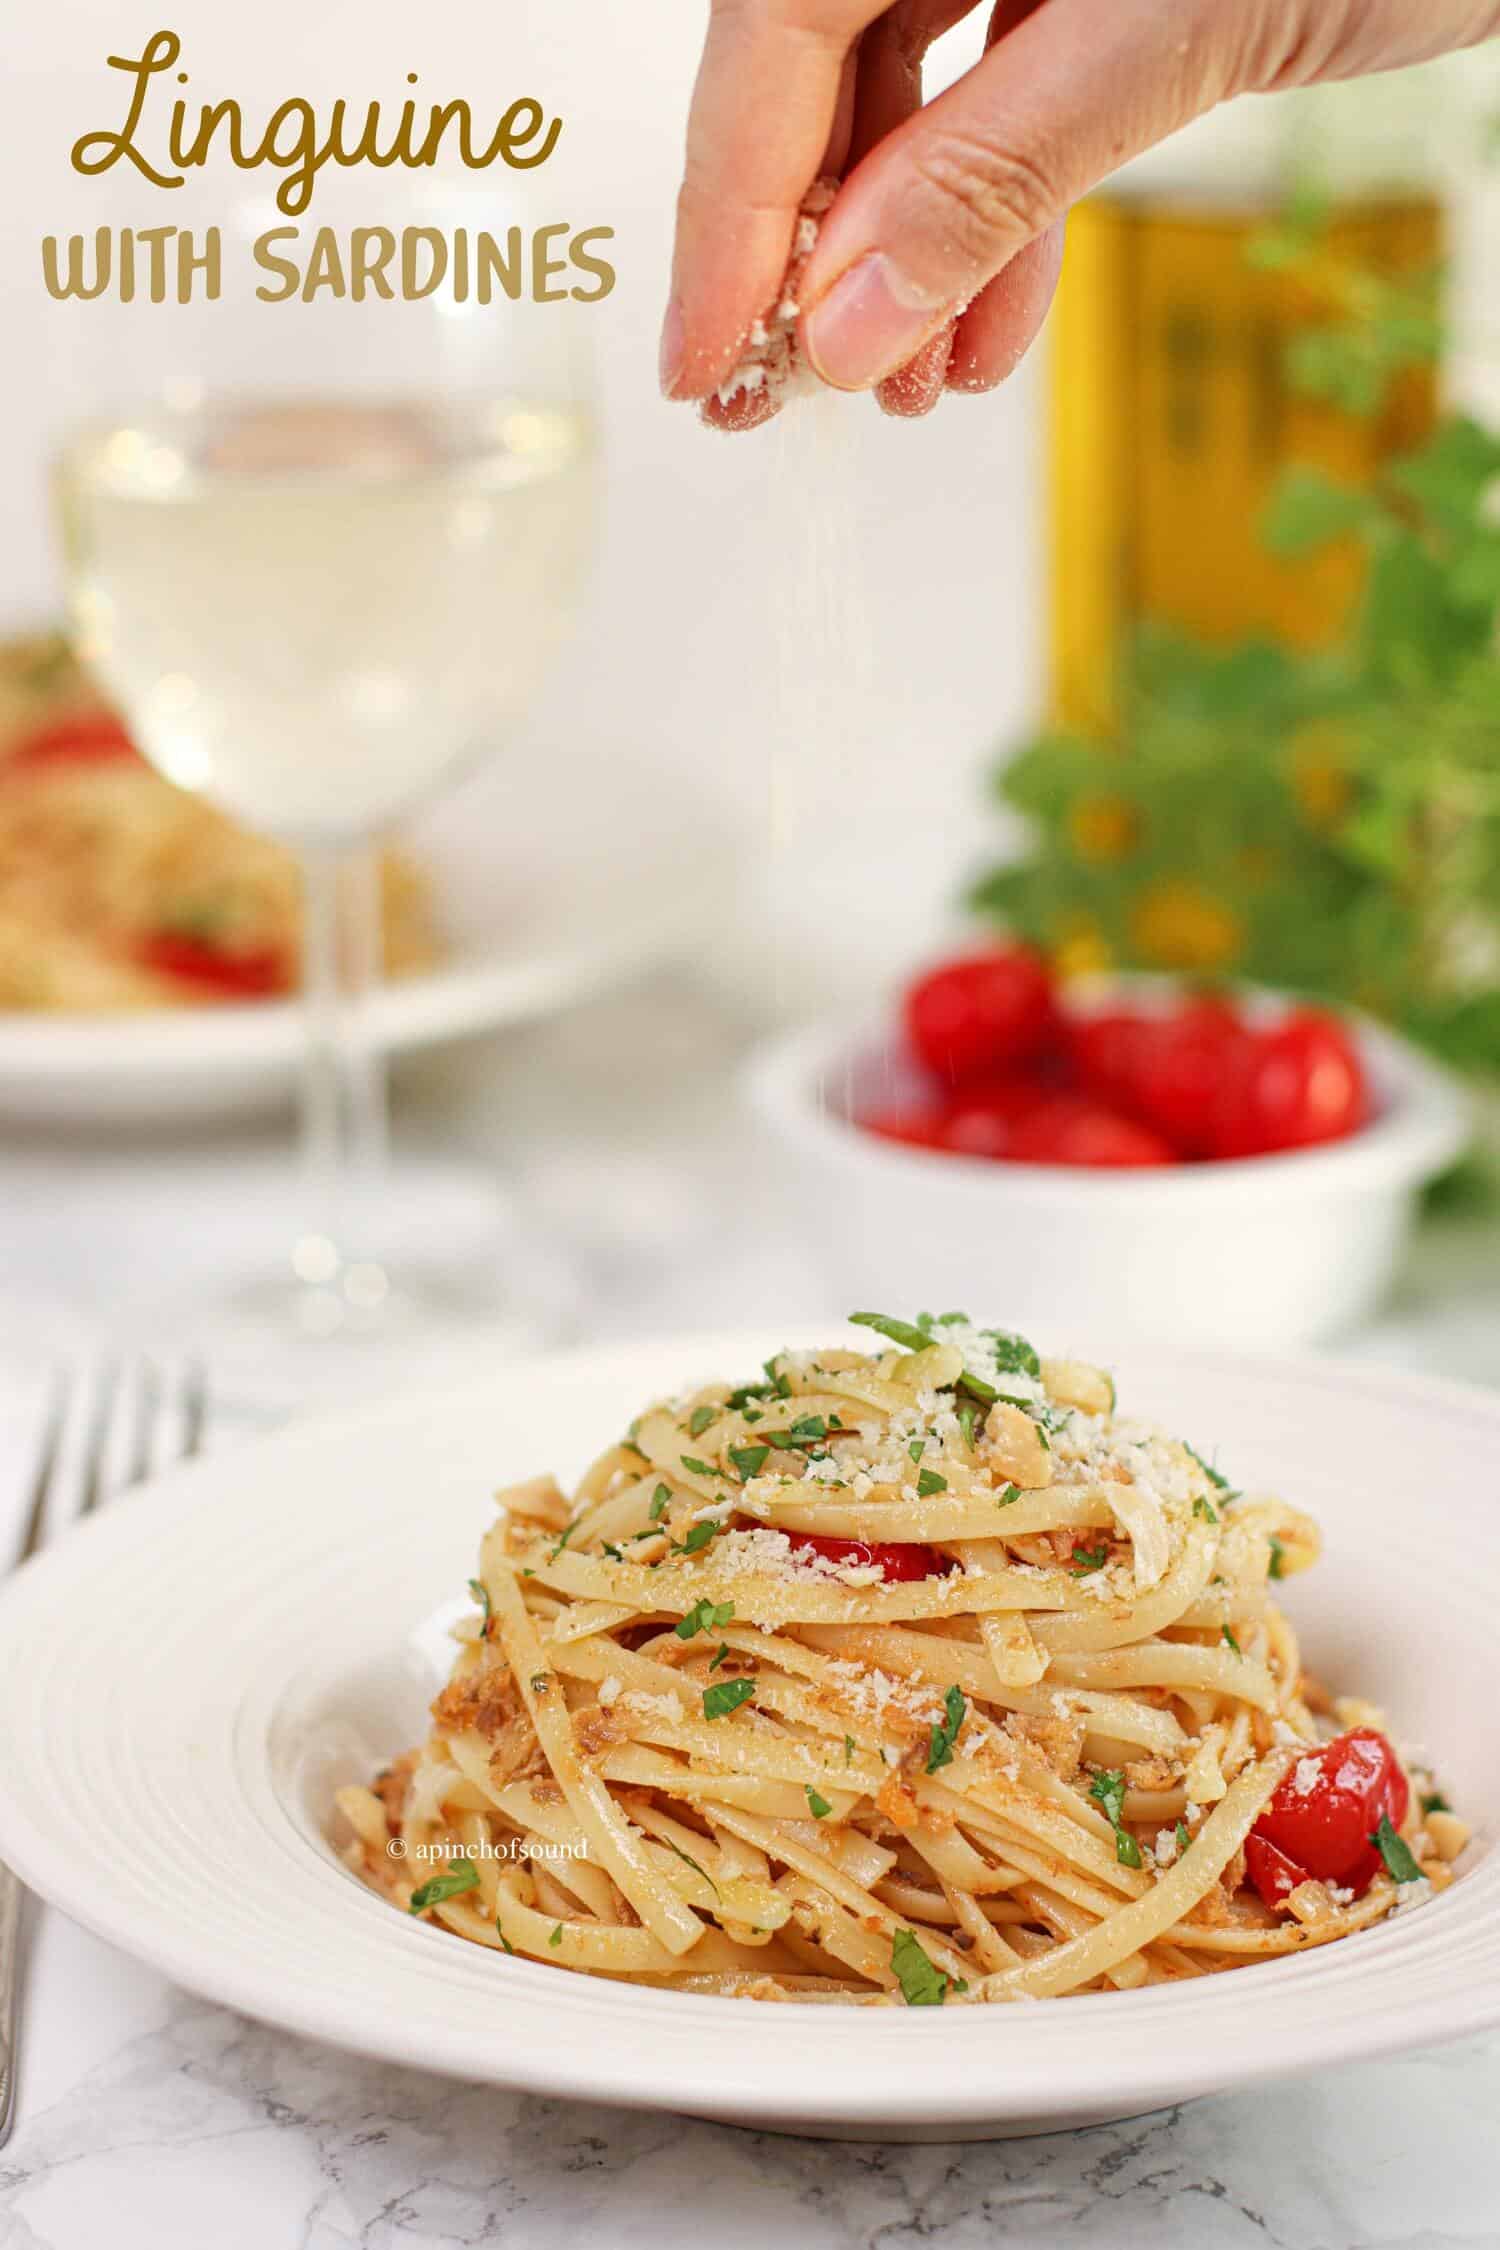 linguine pasta with sardines, tomatoes, peanuts, bread crumbs and parsley